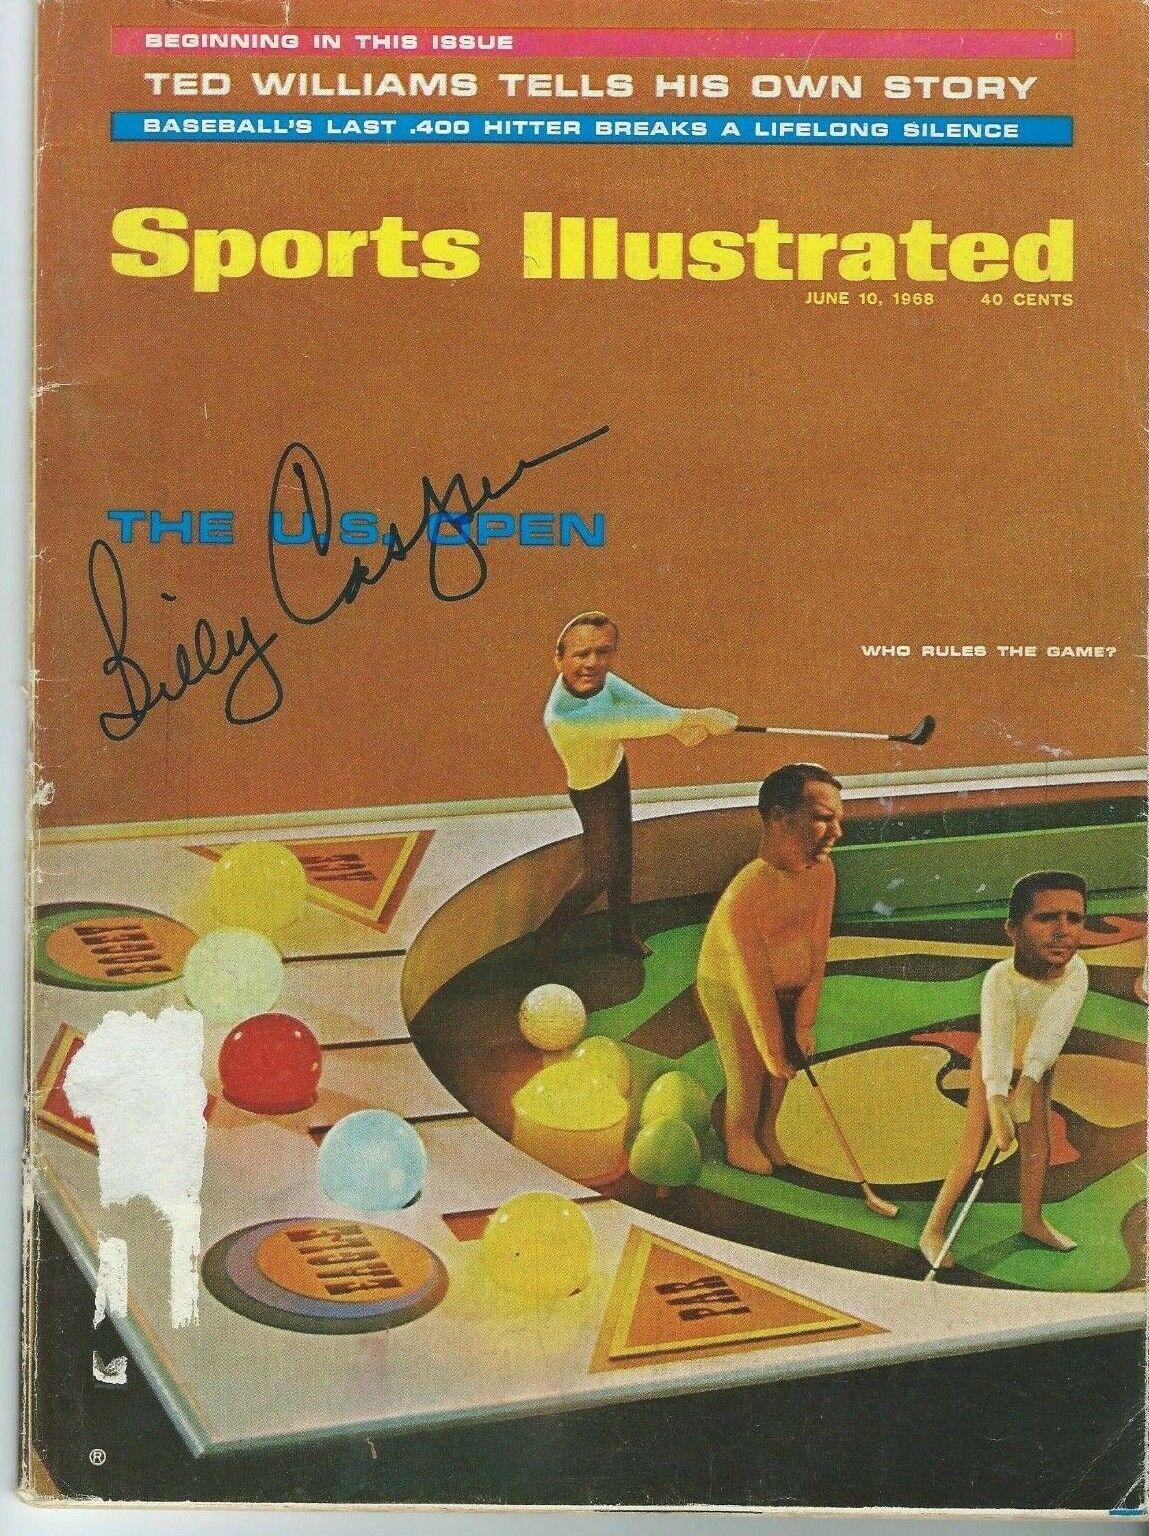 Billy Directly managed store Casper Autographed Sports Illustrated Max 83% OFF Magazine 10 6 Full